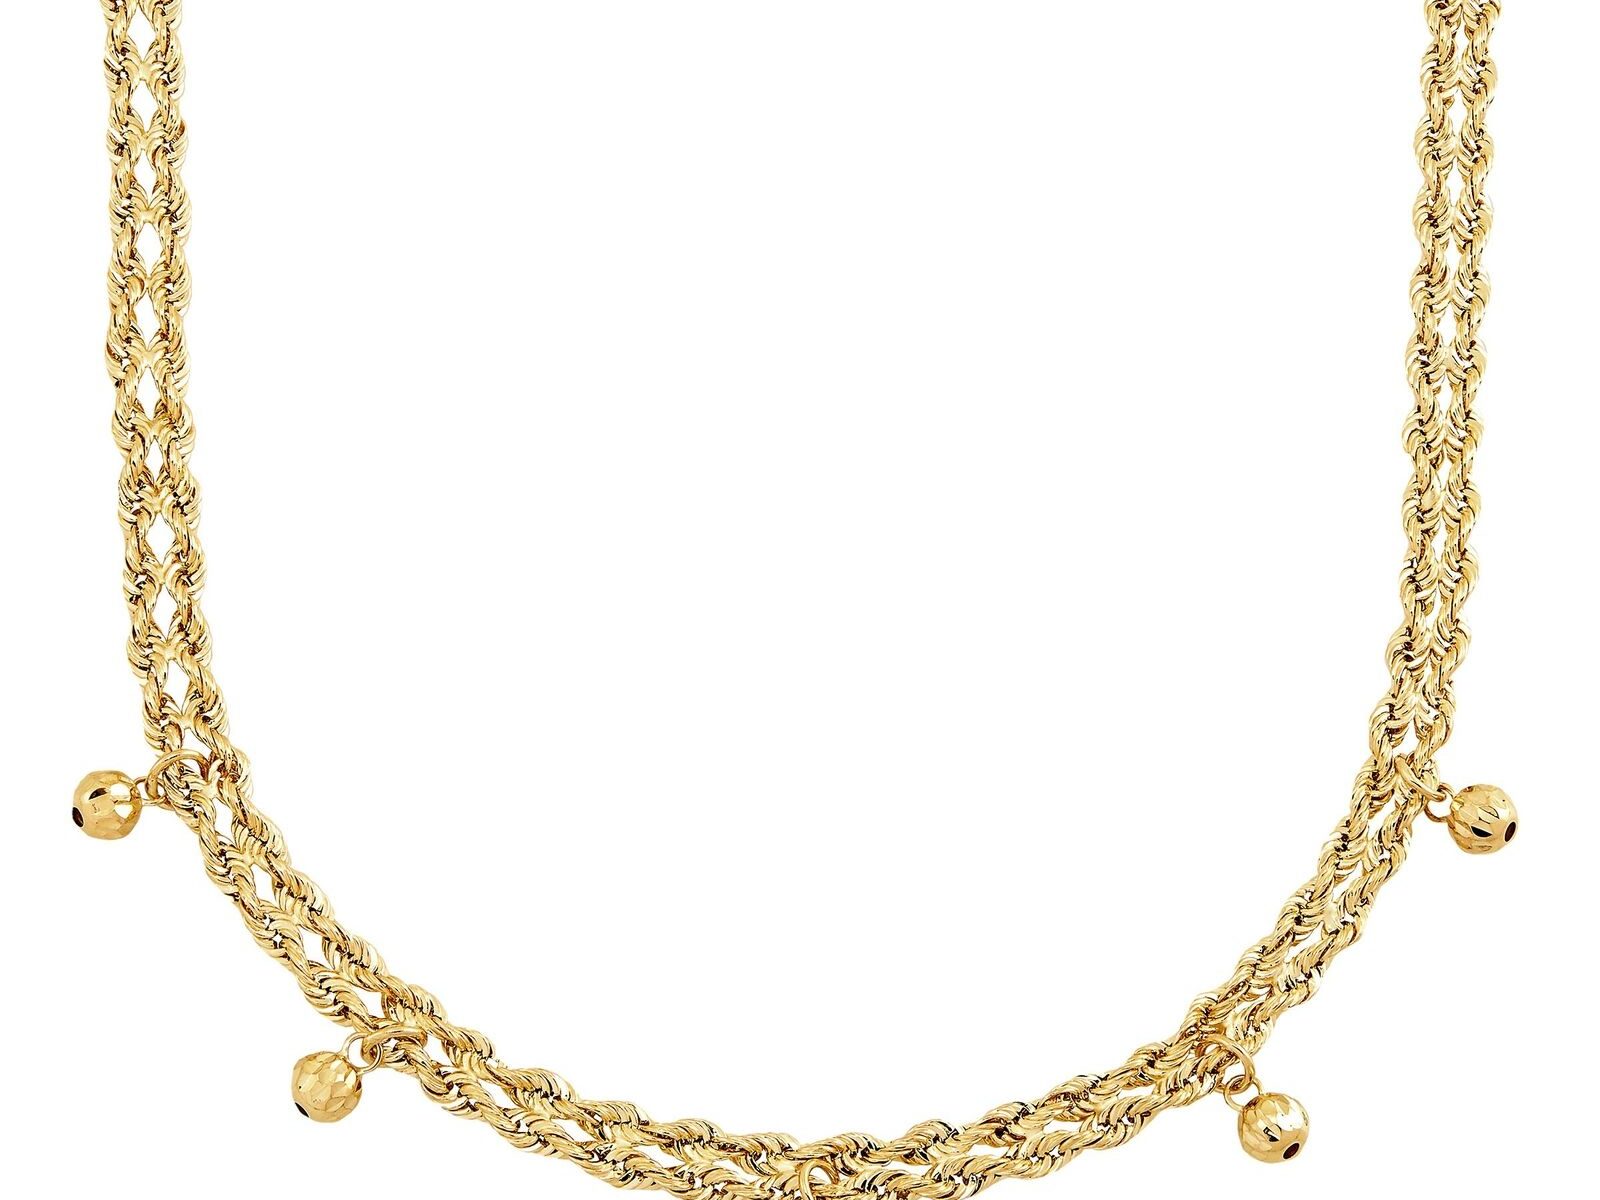 Drop Bead Chain Necklace in 10K Gold, 16"